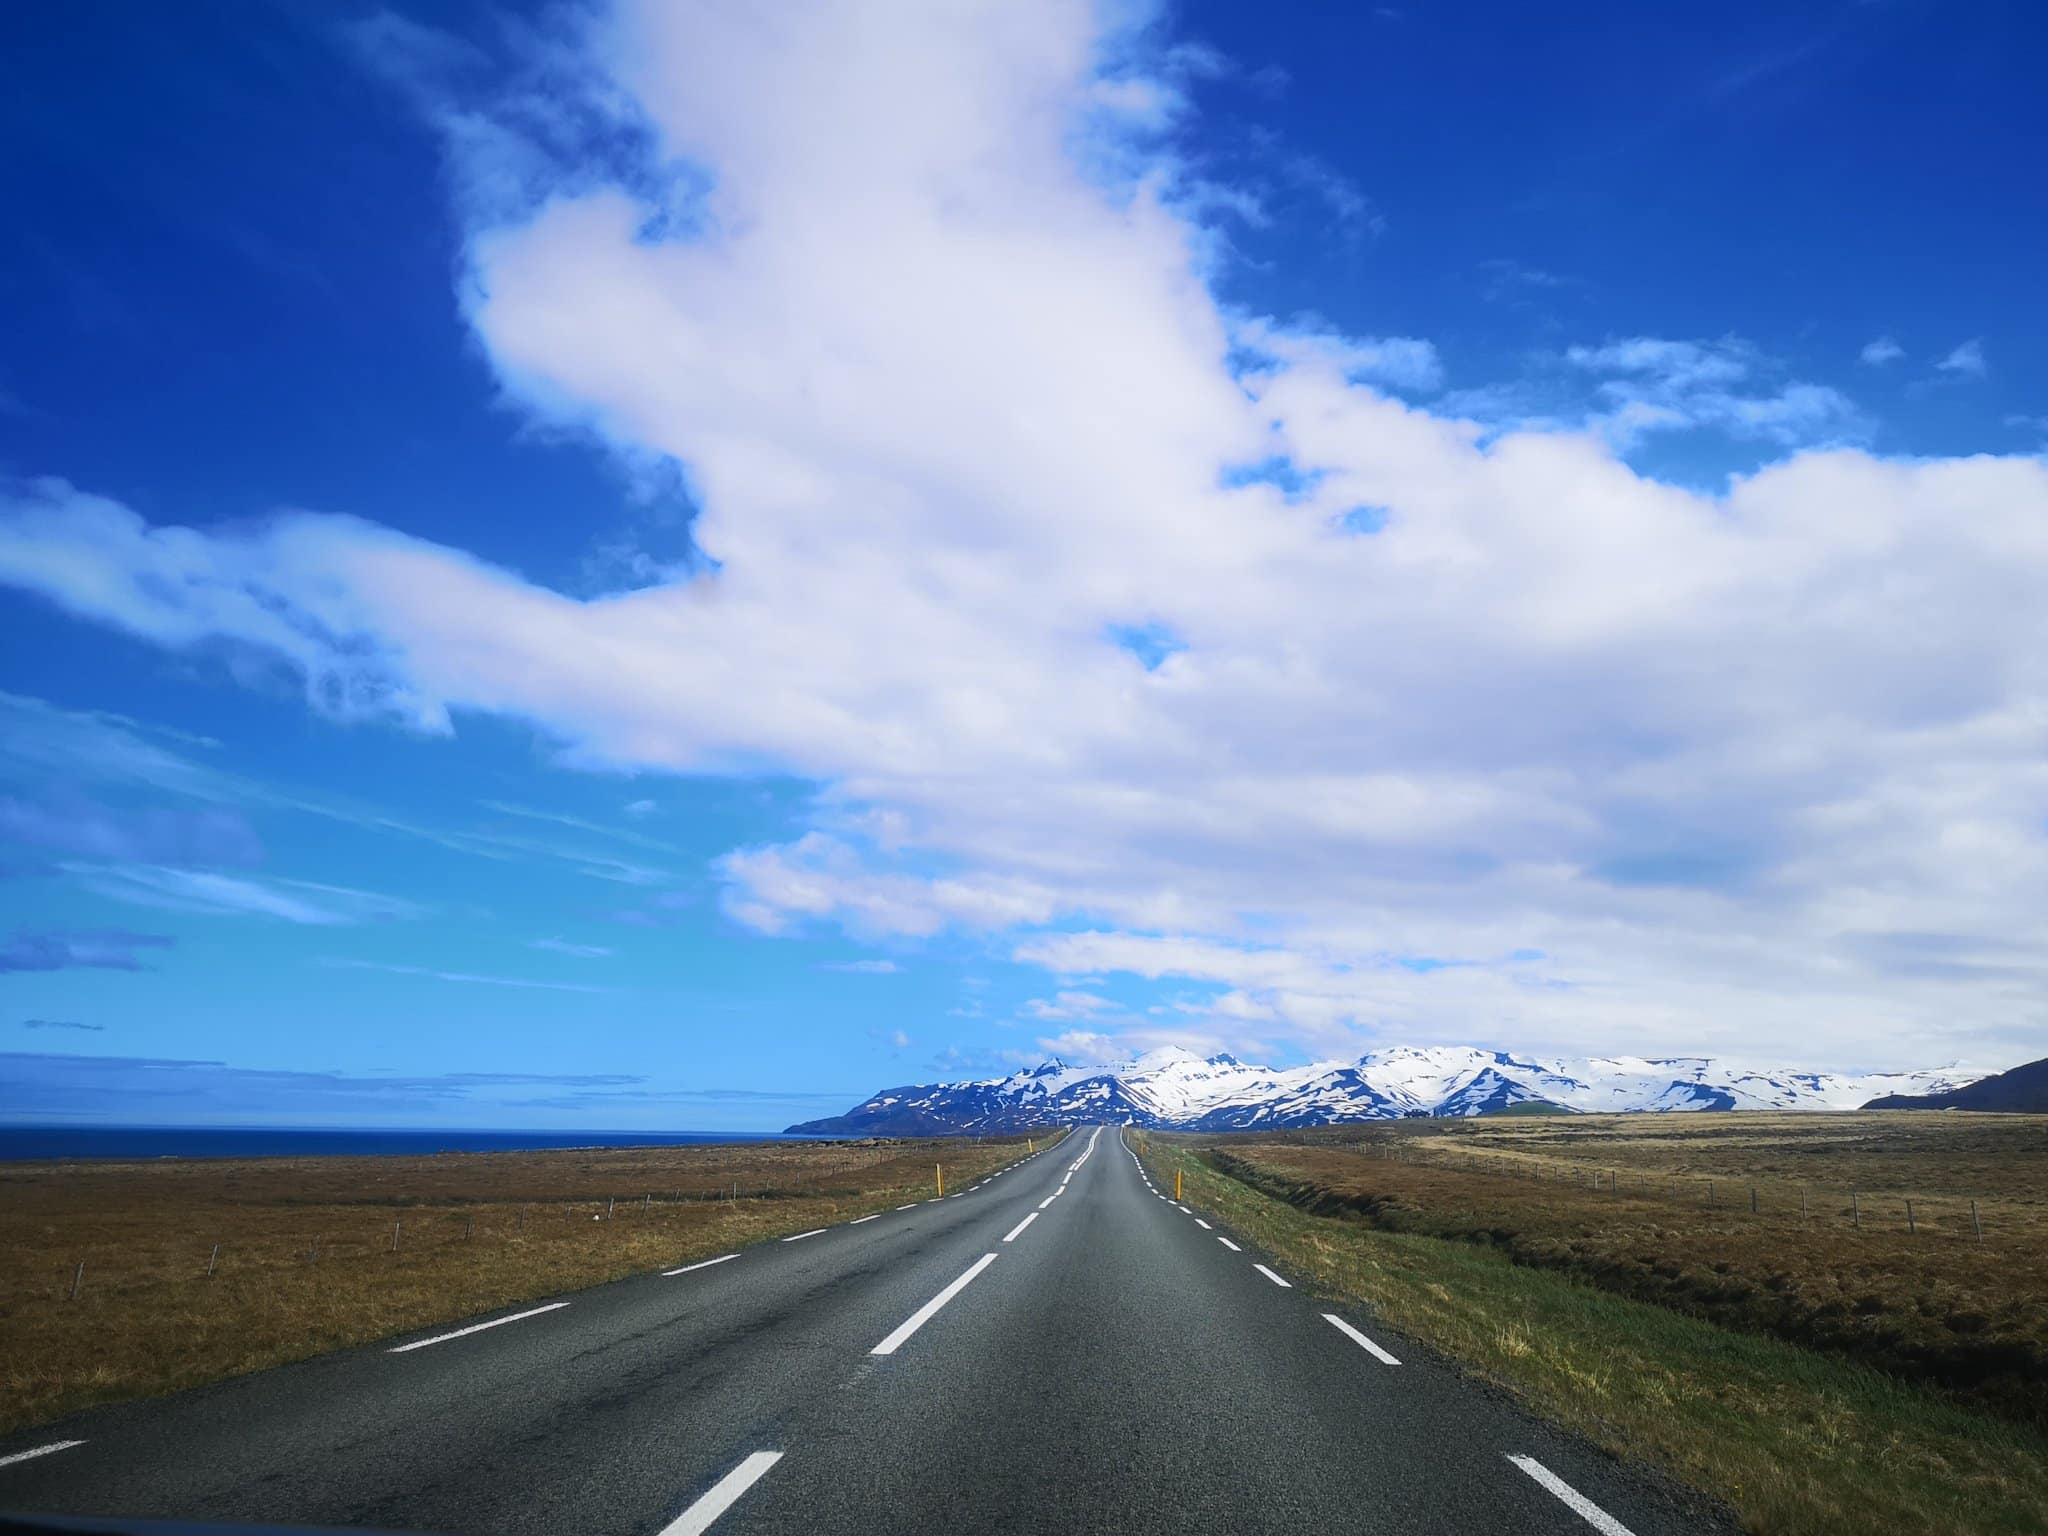 Road in North Iceland with blue sky and mountains in the distance.